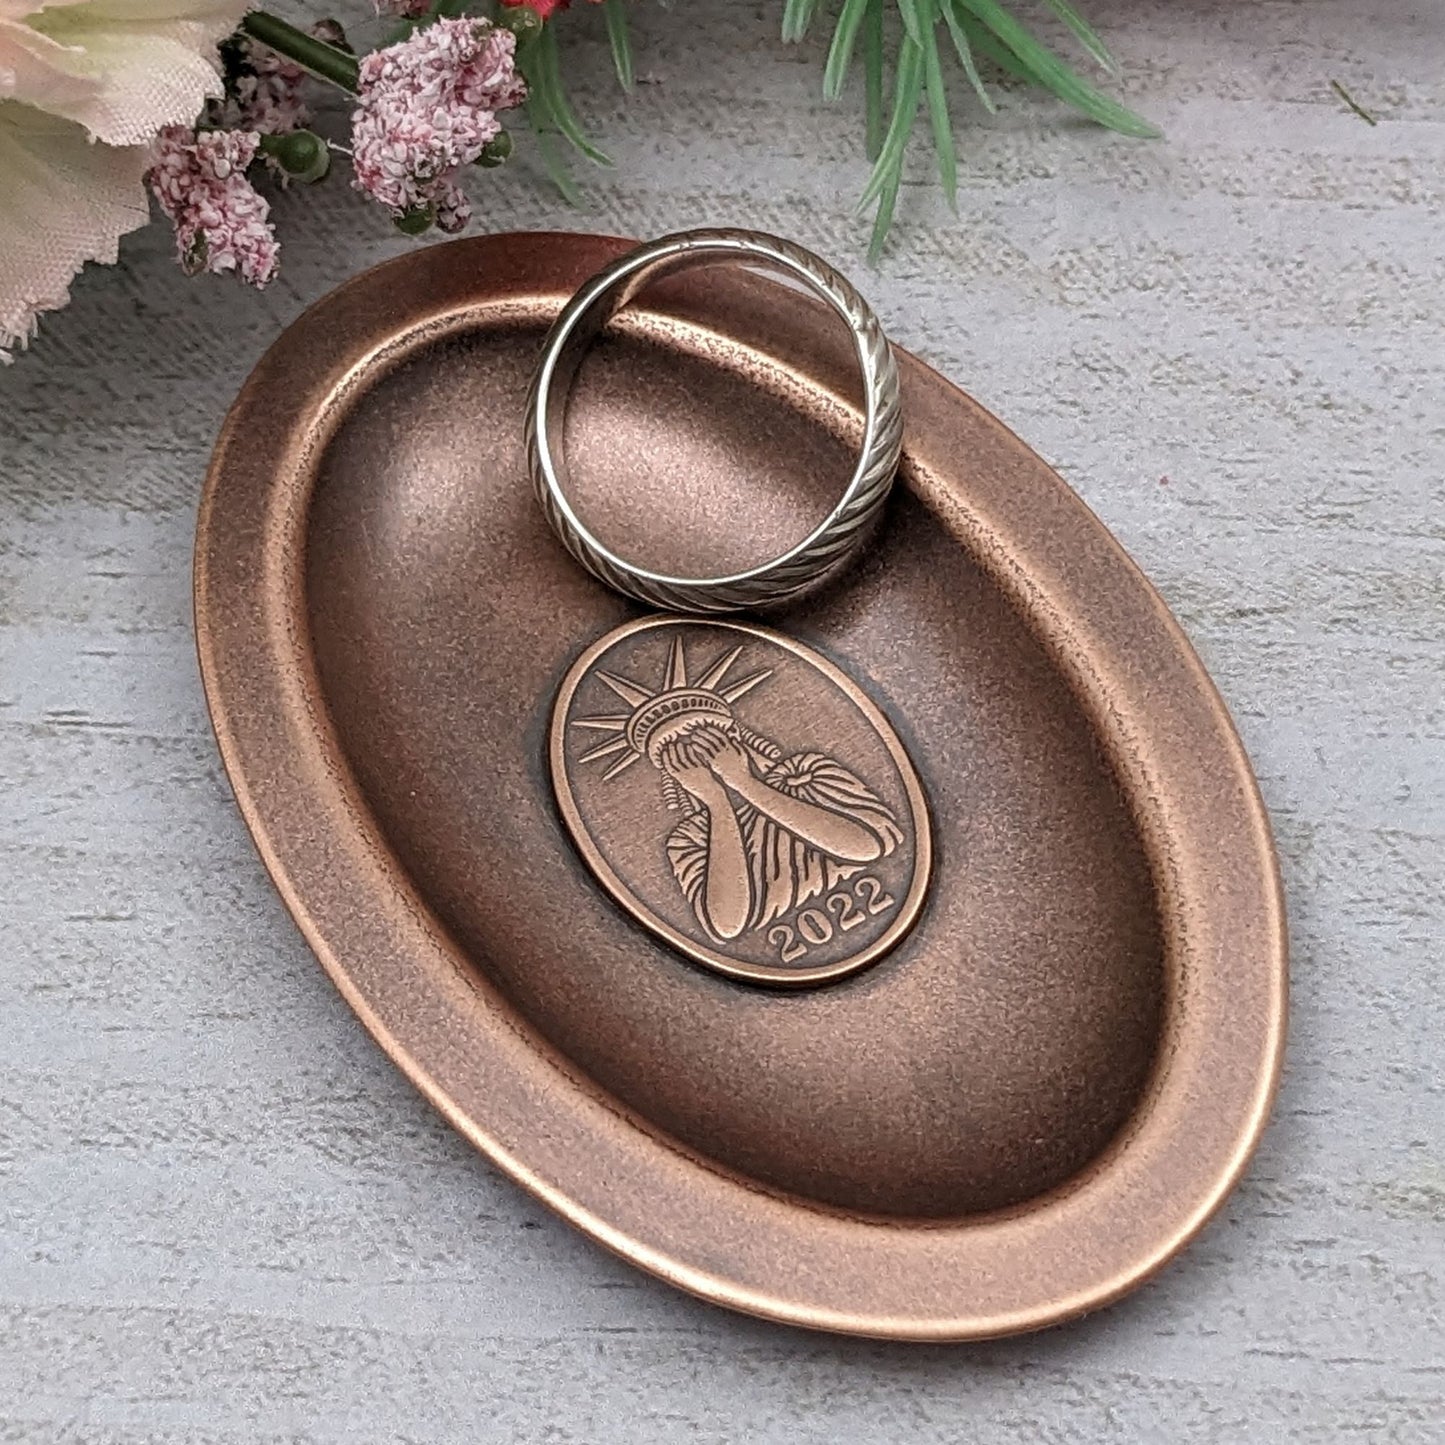 Crying Liberty 2022 Copper Oval Ring Dish